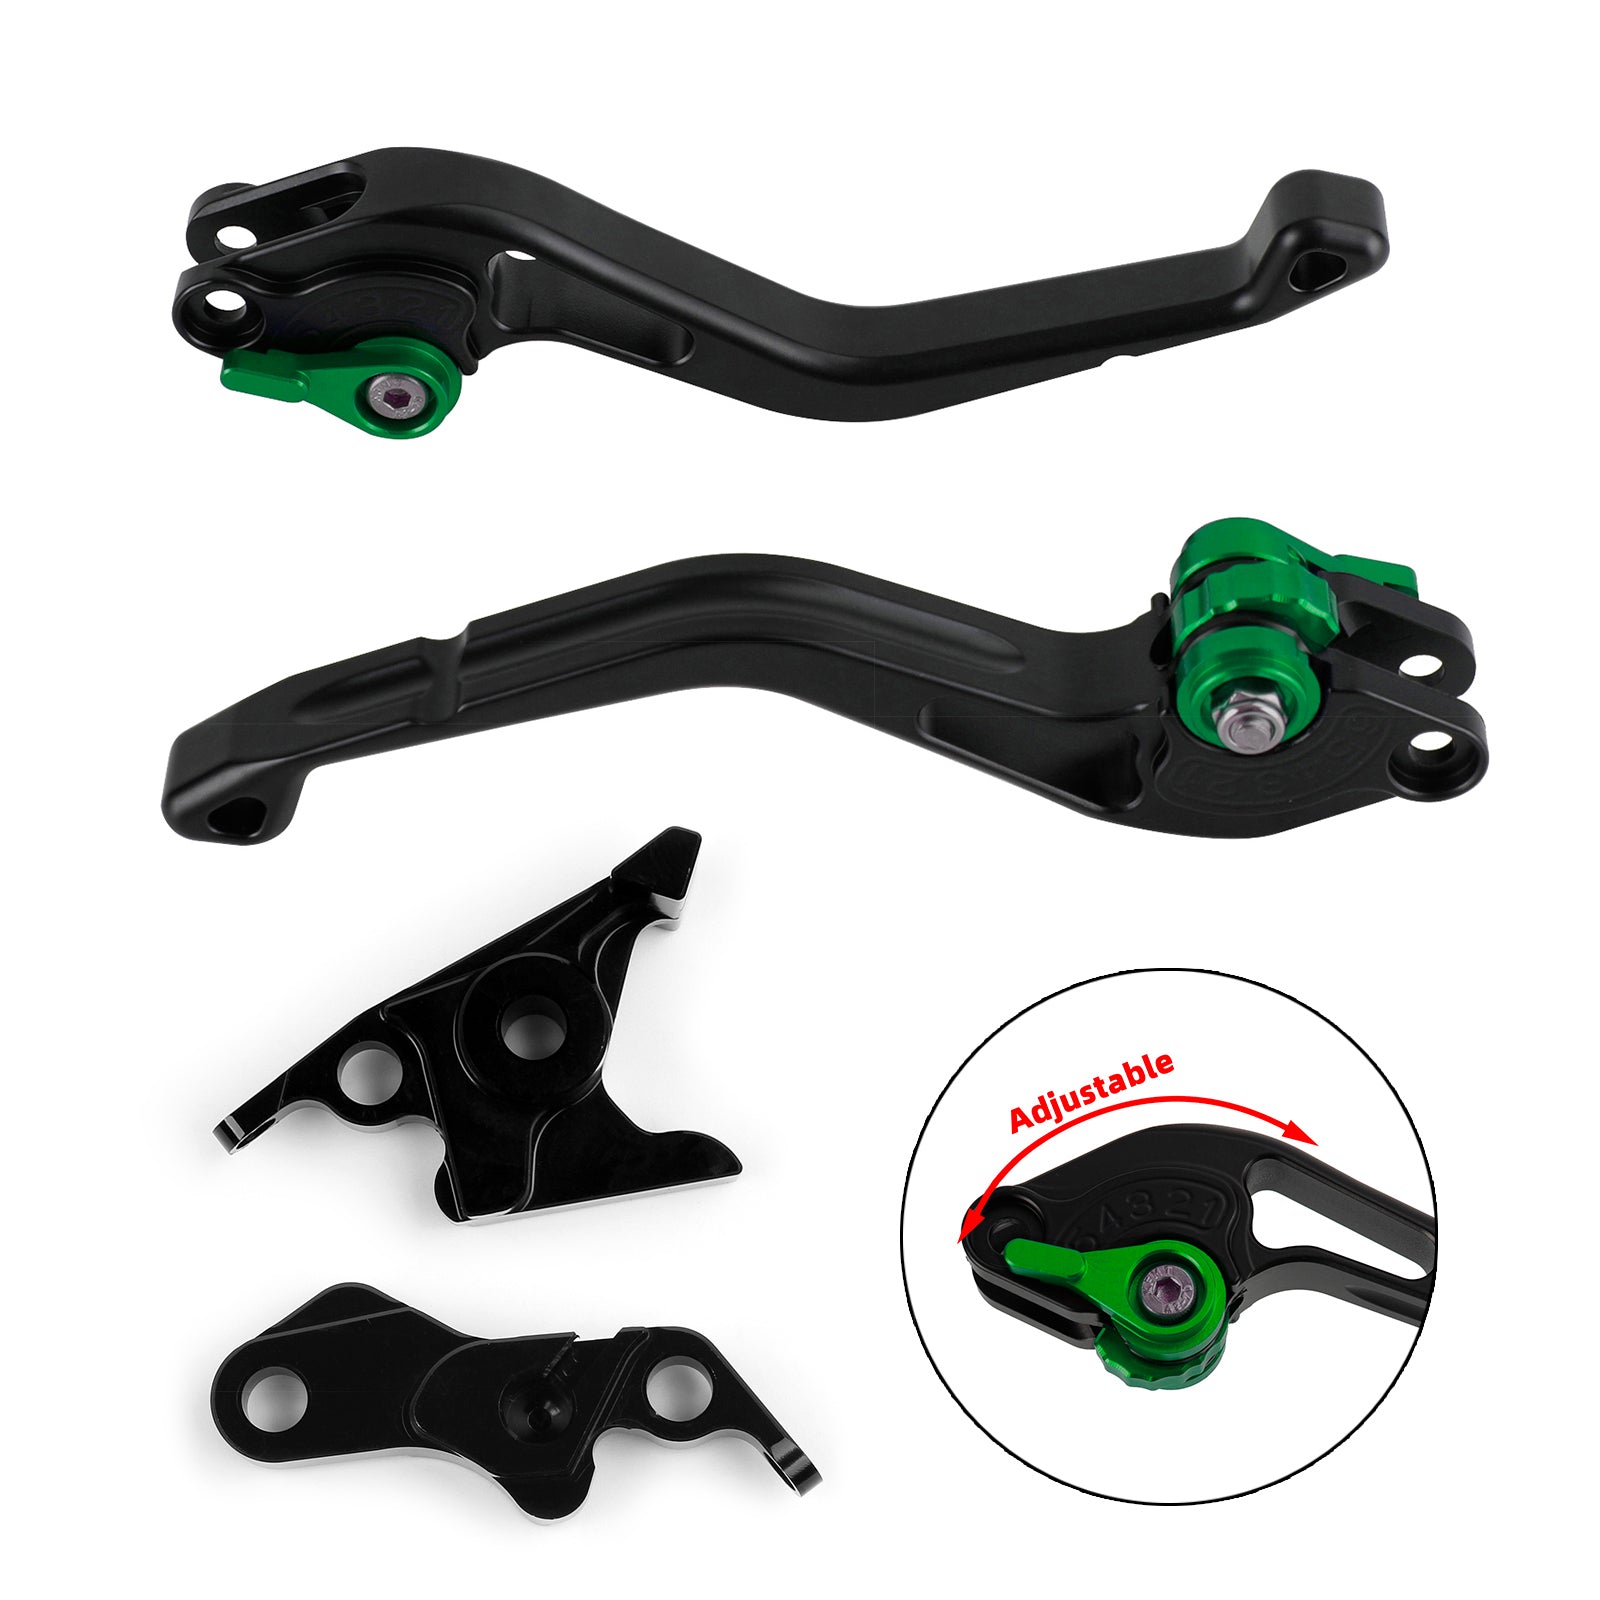 NEW Short Clutch Brake Lever fit for Hyosung GT250R 06-2010 GT650R 2006-2009